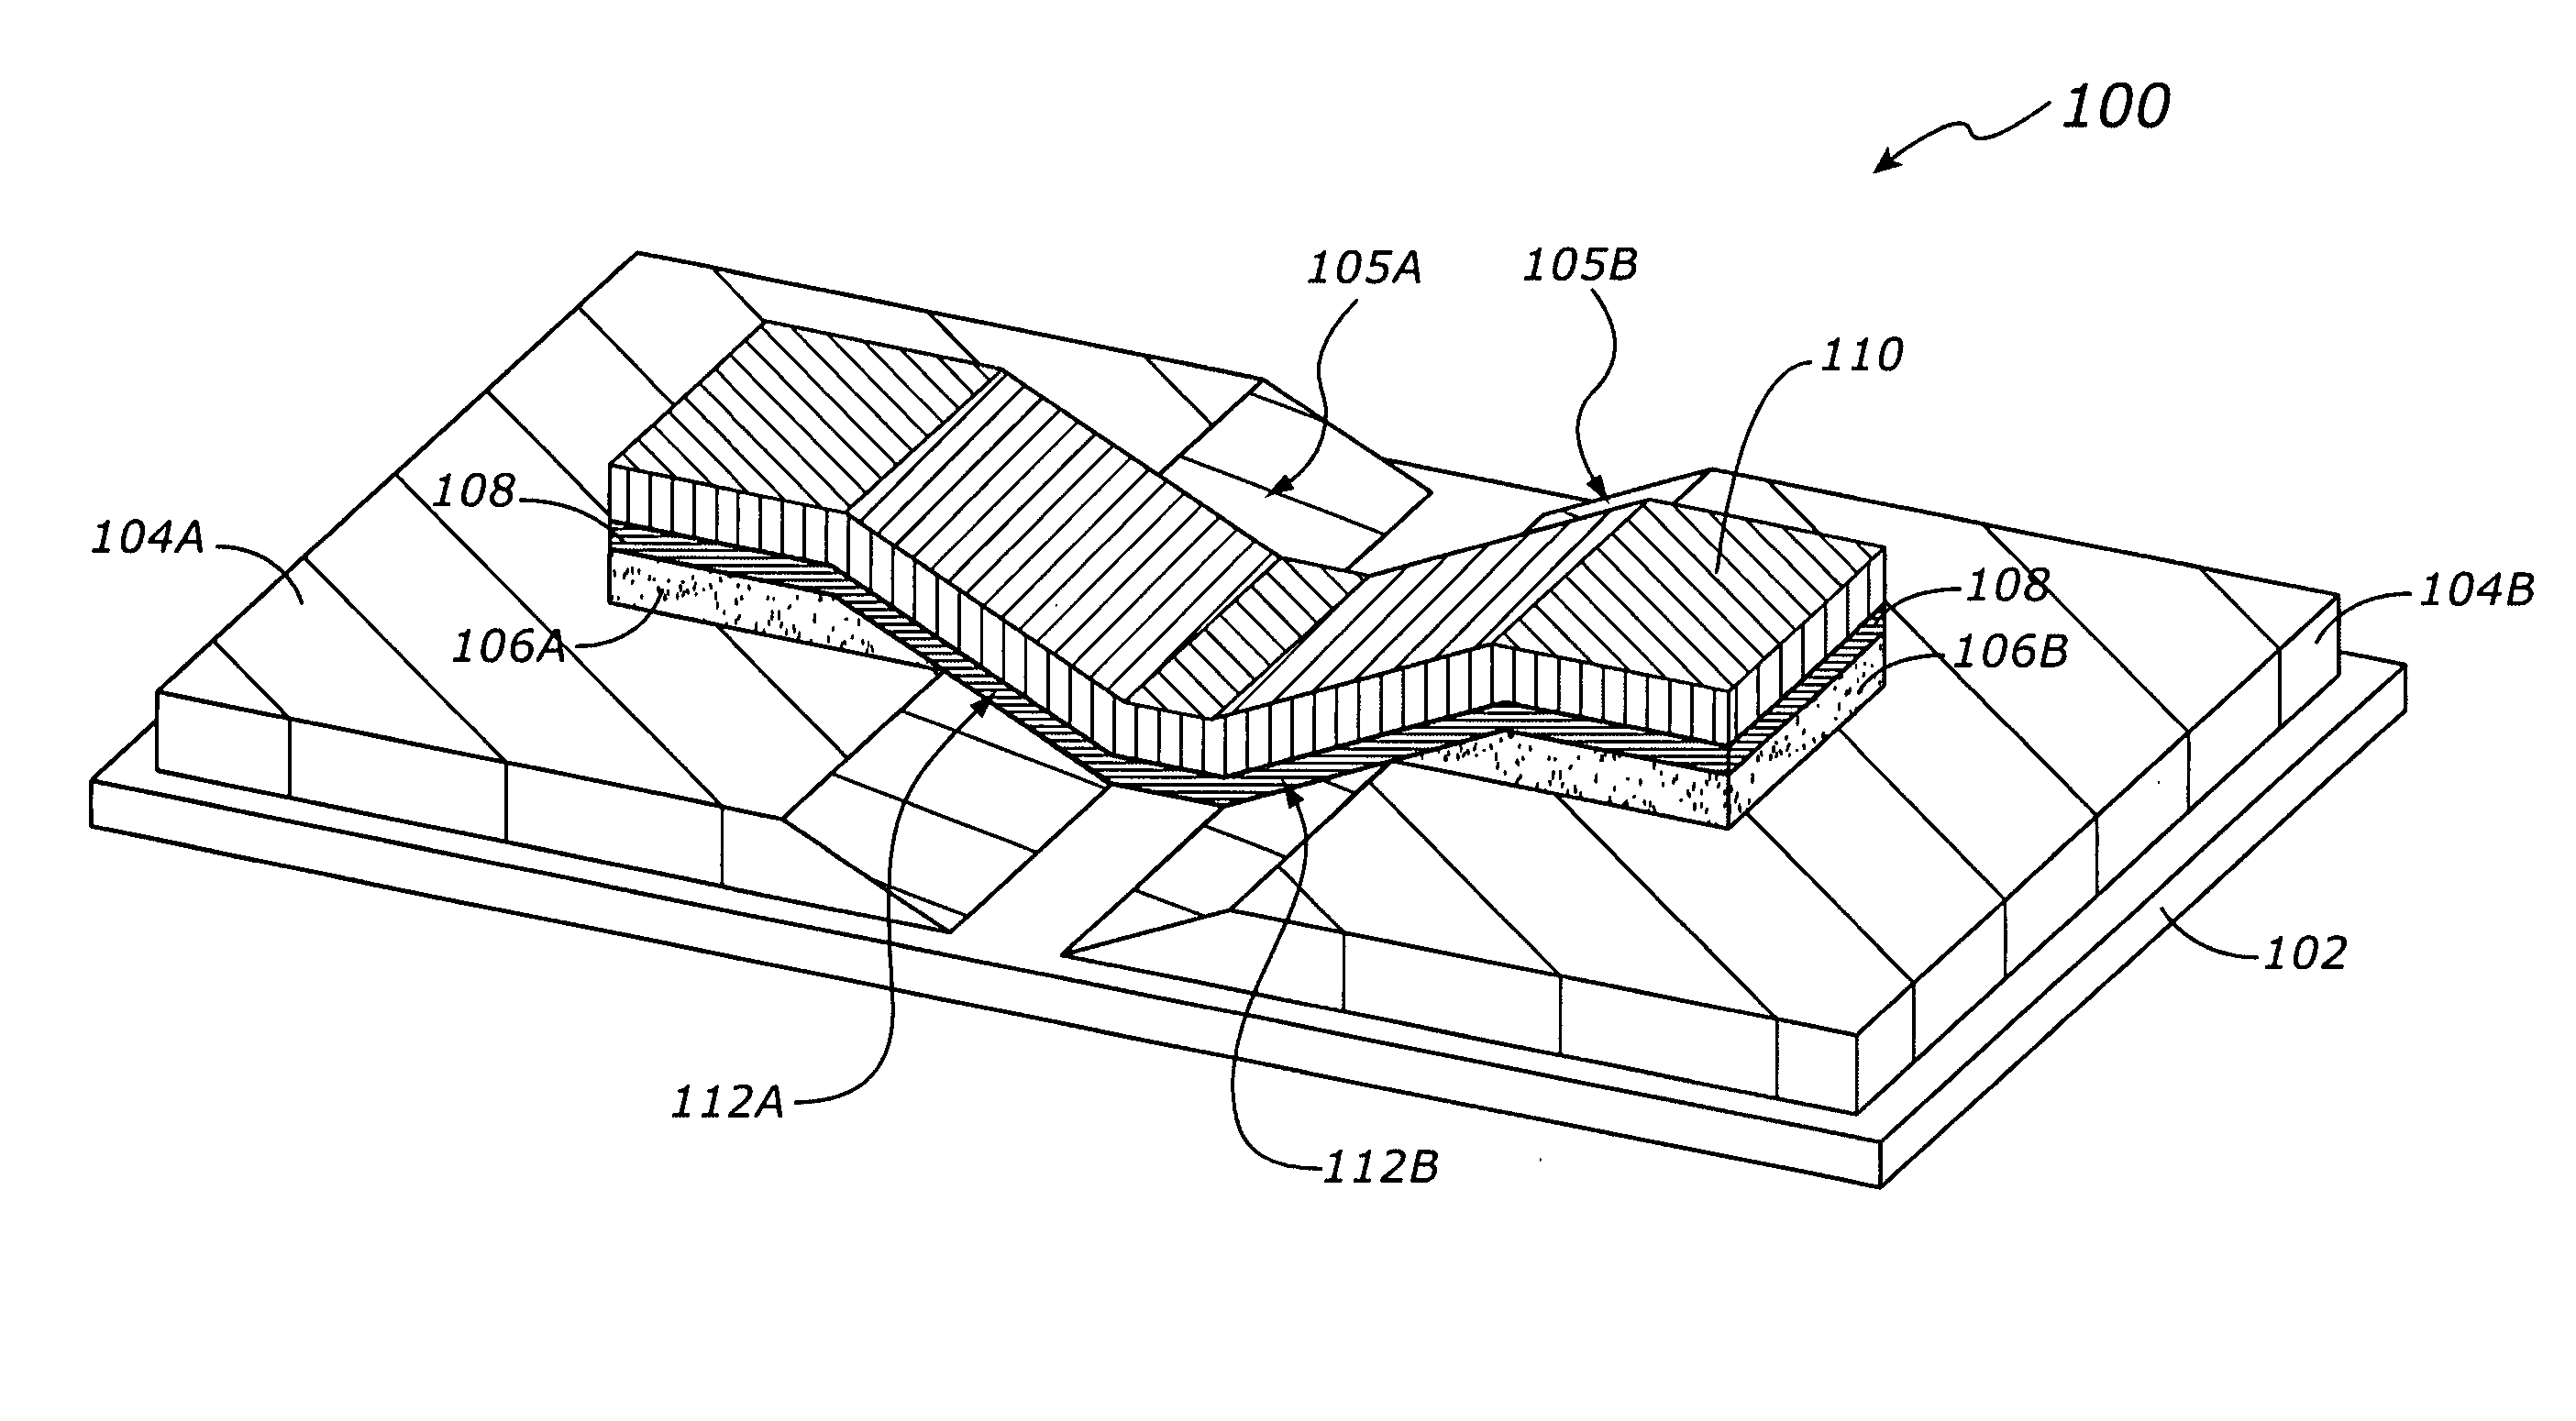 Superconducting integrated circuit and methods of forming same